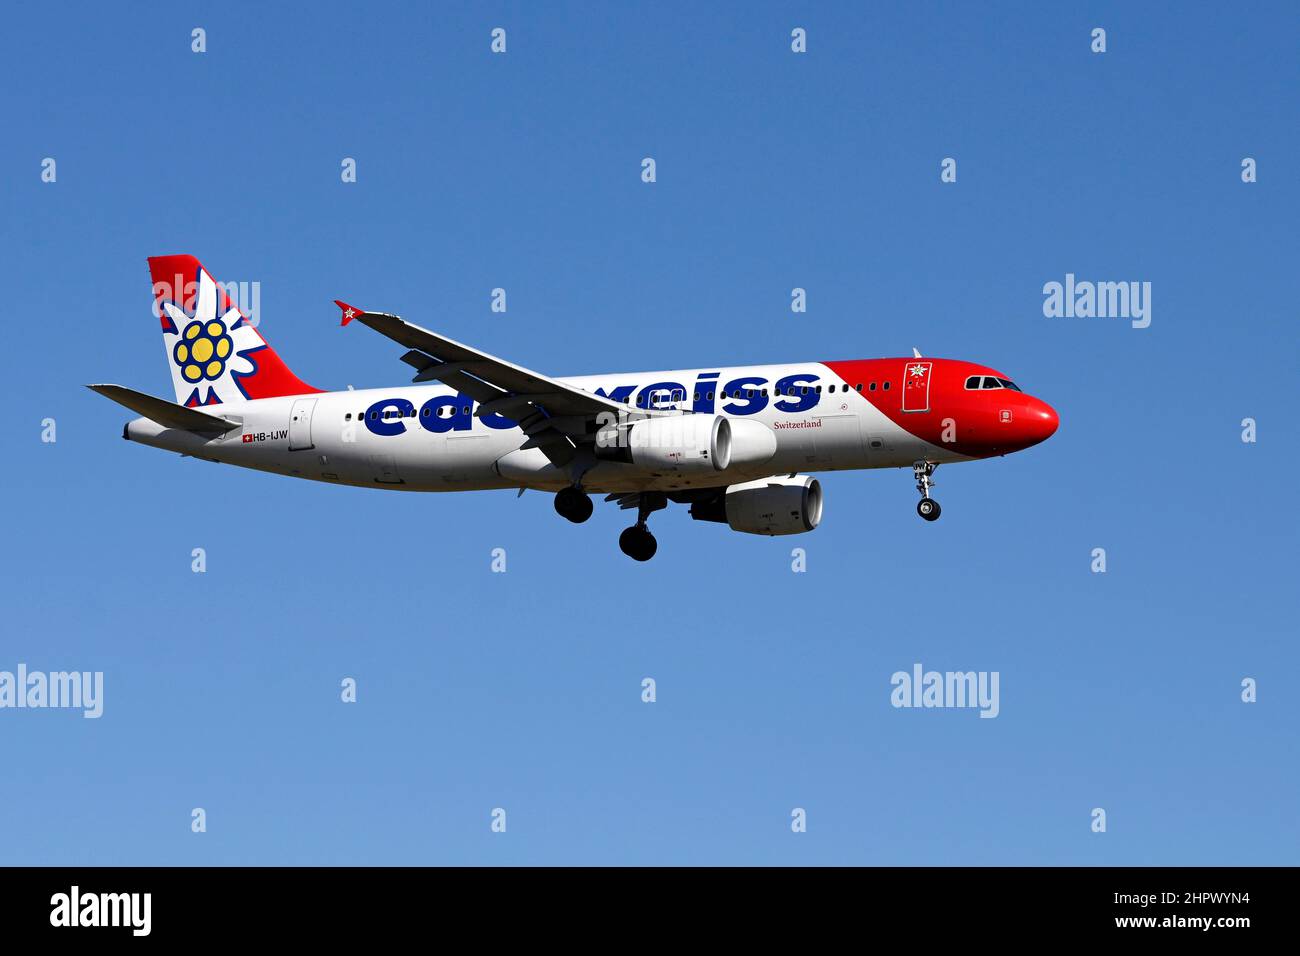 Aircraft Edelweiss Air, HB-IJW, Airbus A320-200 Stock Photo